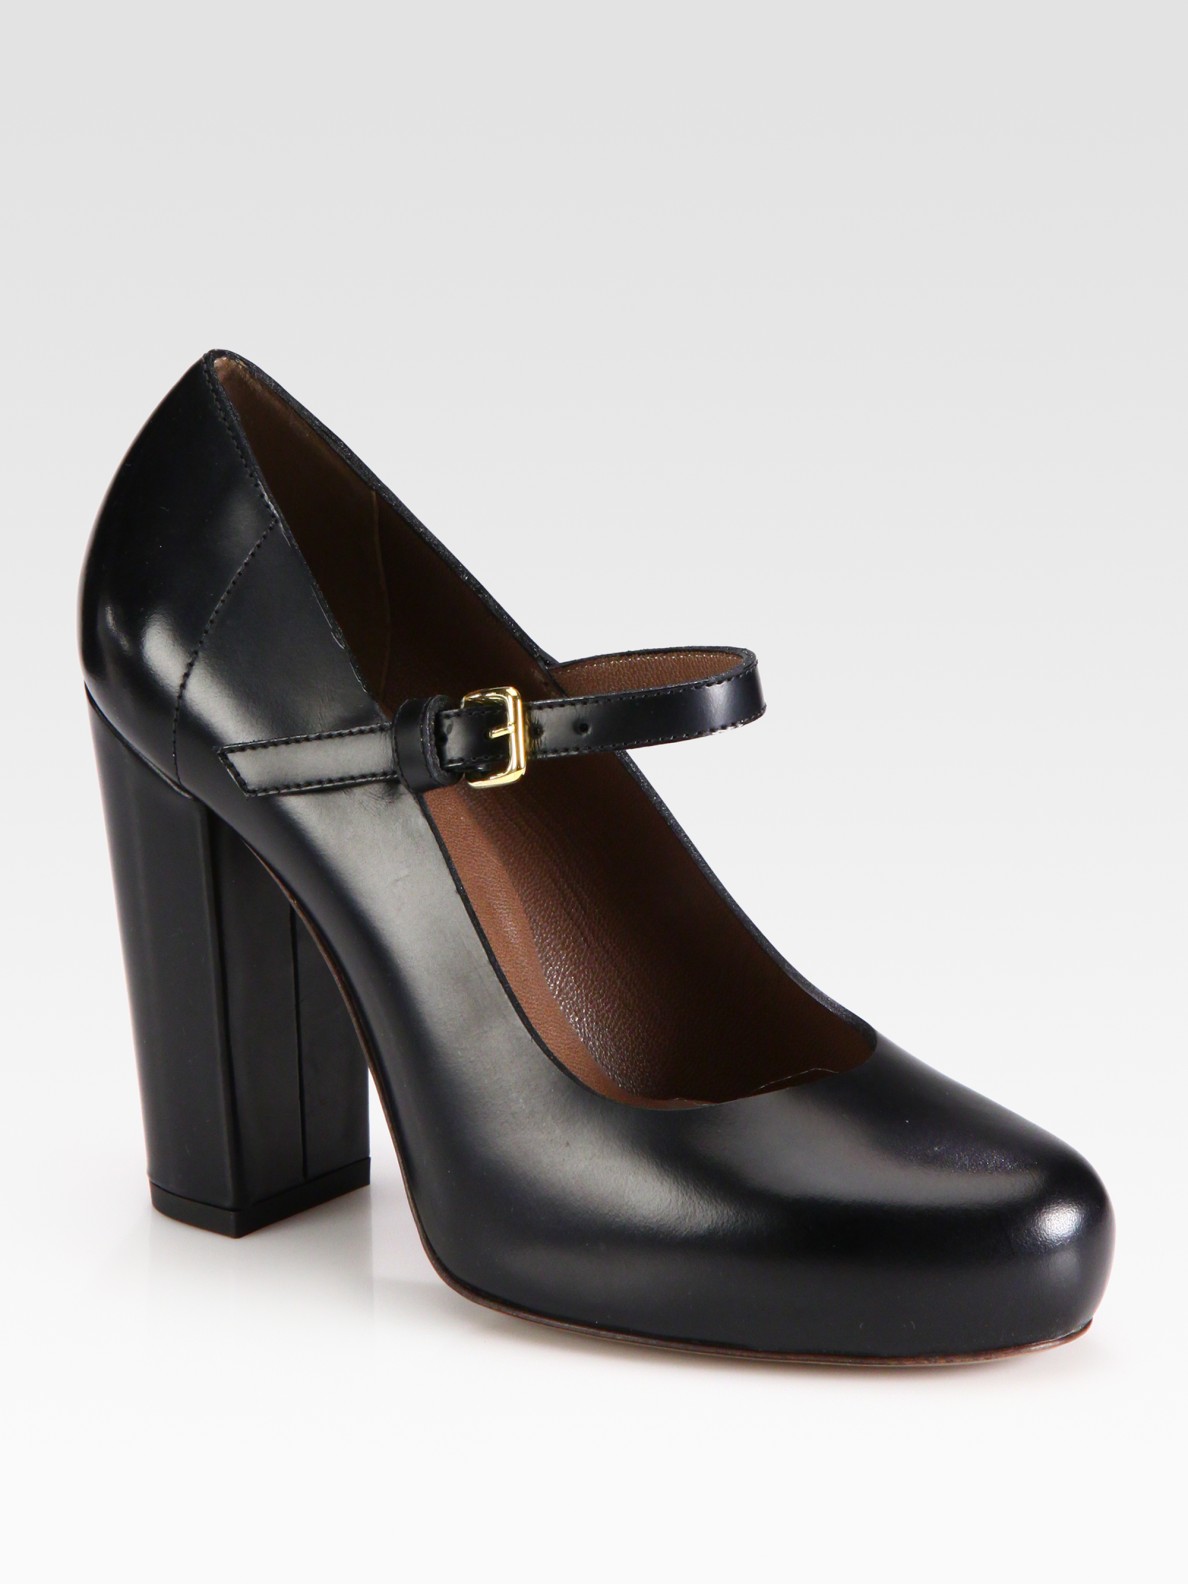 Marni Leather Mary Jane Pumps in Black | Lyst